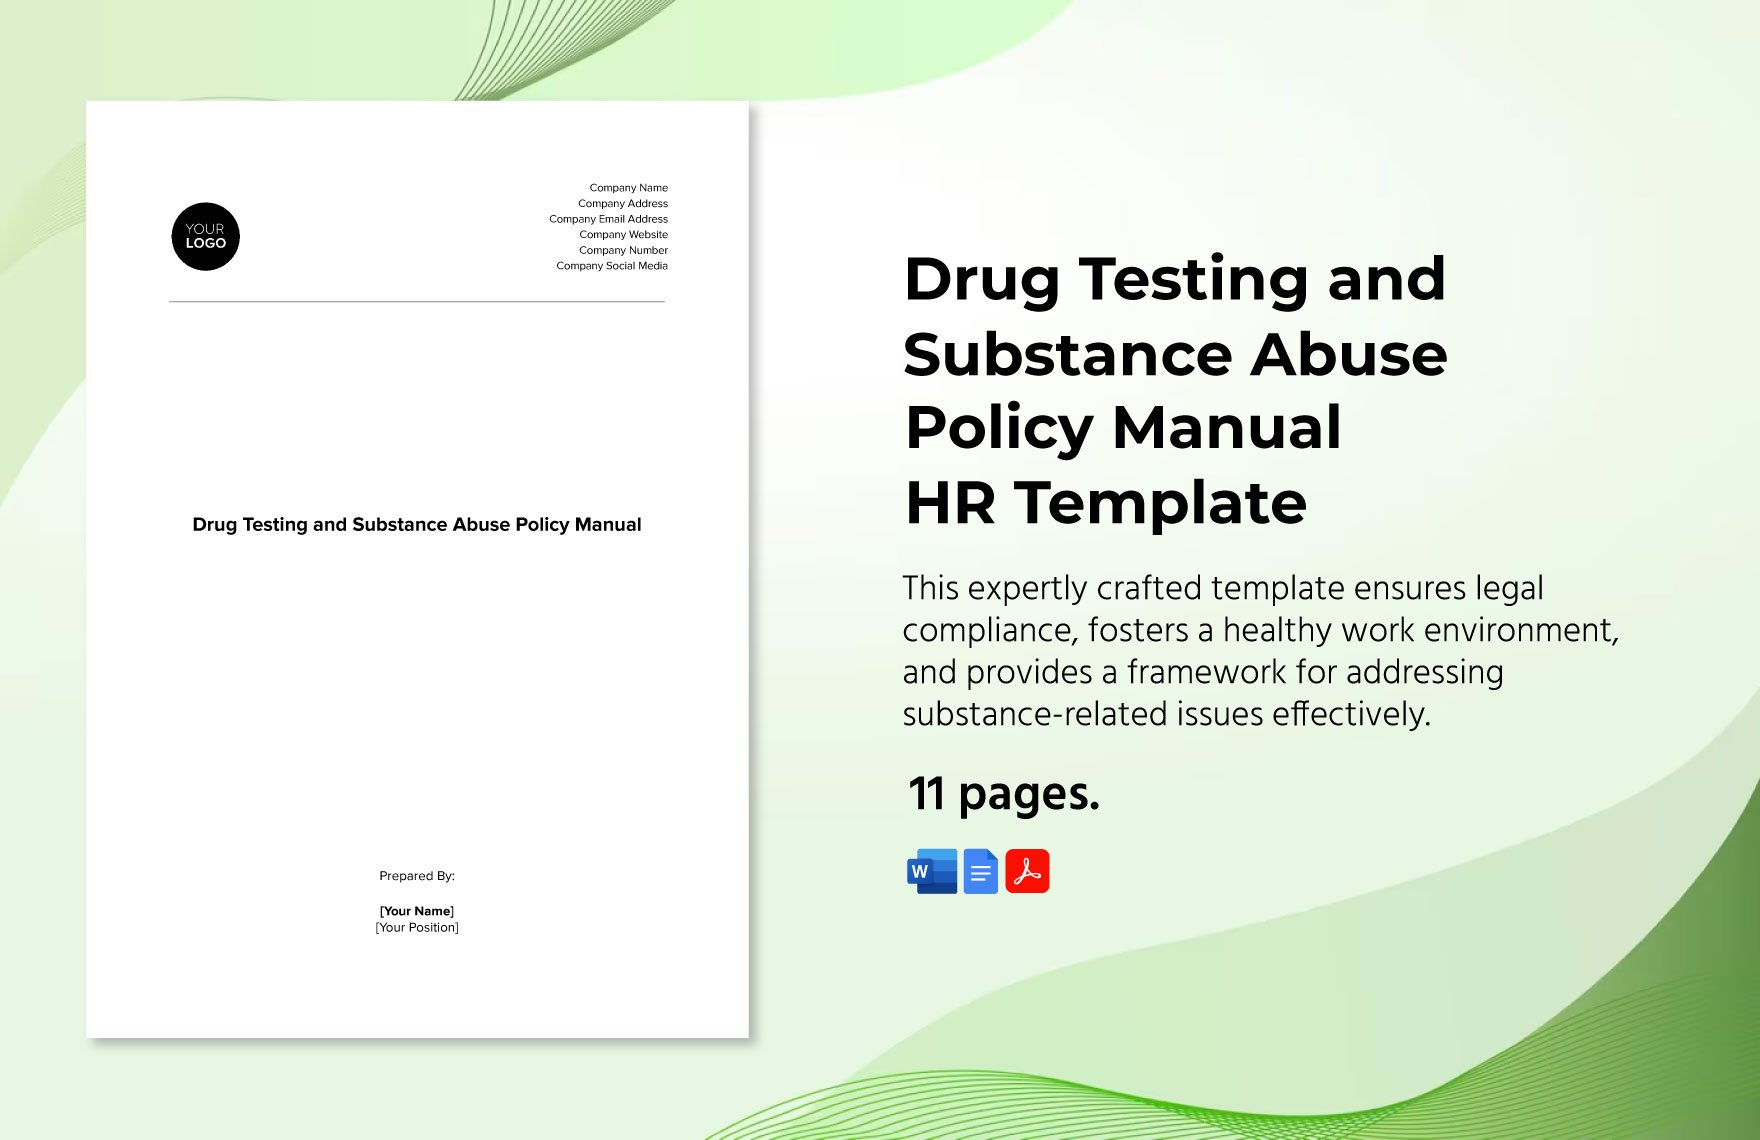 Drug Testing and Substance Abuse Policy Manual HR Template in Word, Google Docs, PDF